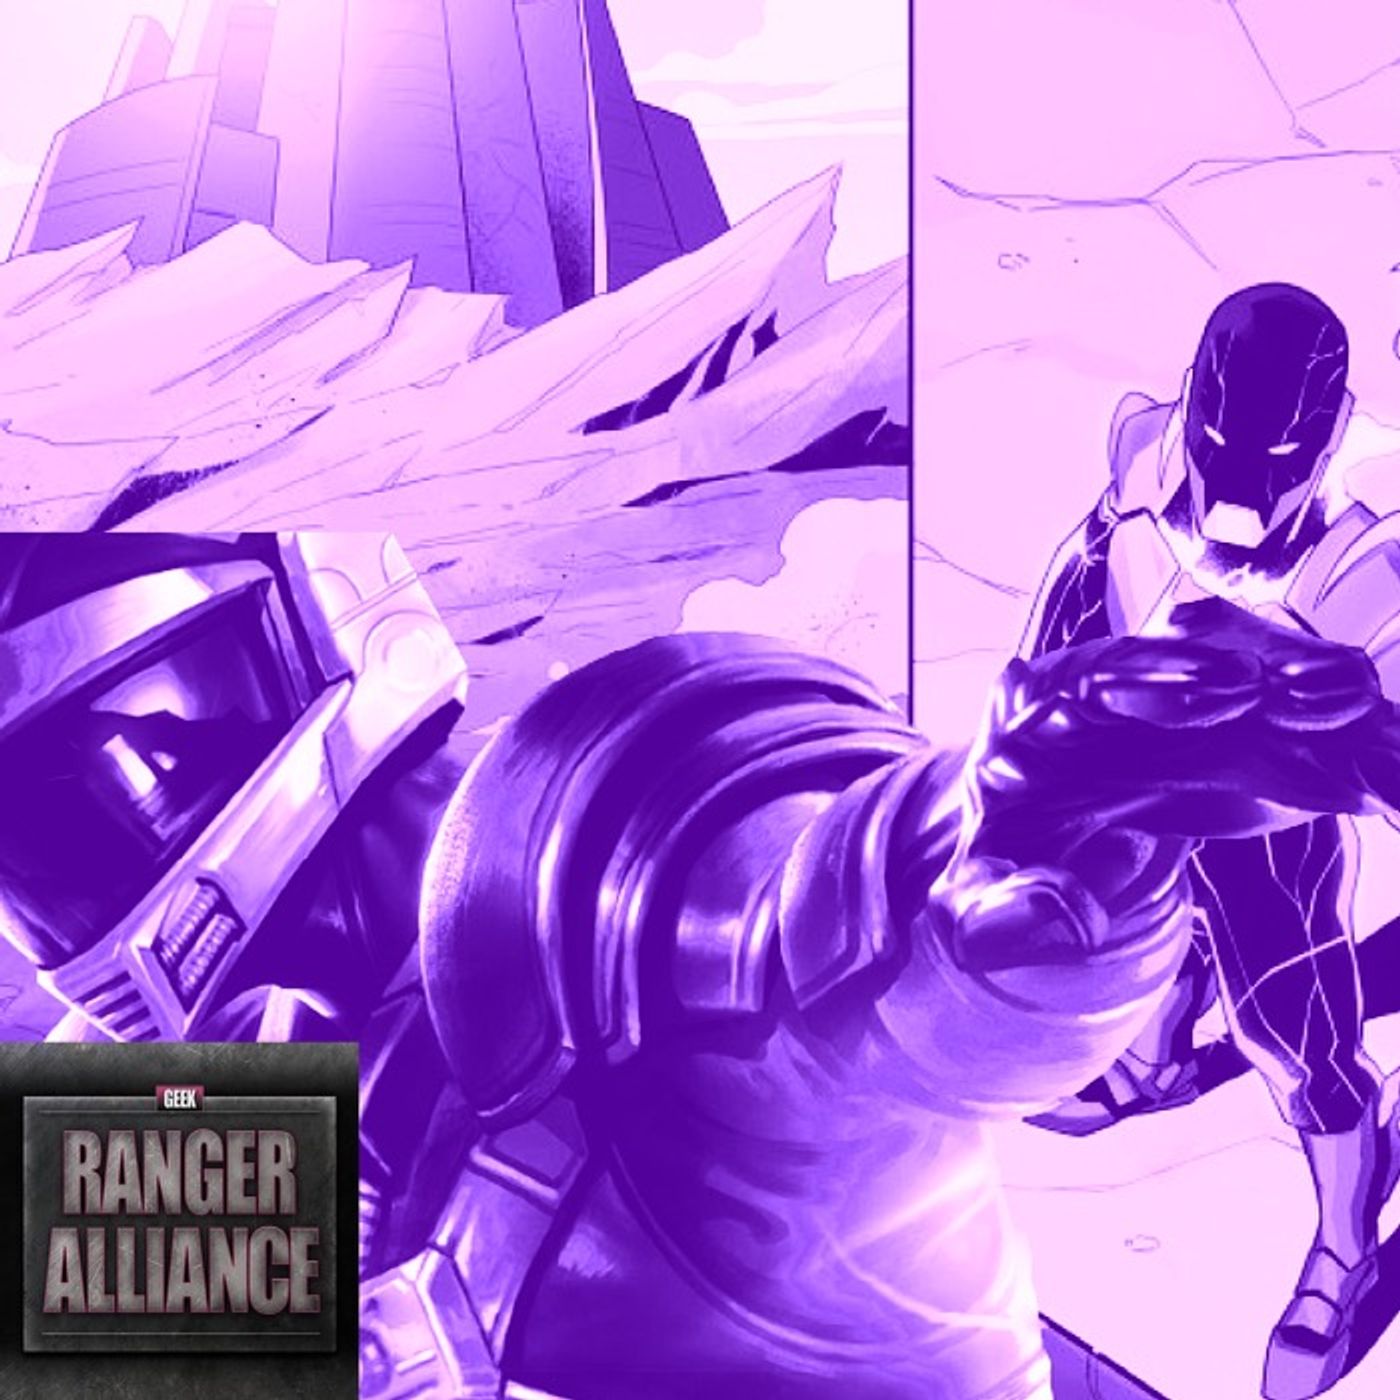 Ranger Alliance Episode 66 Who is The Vessel?